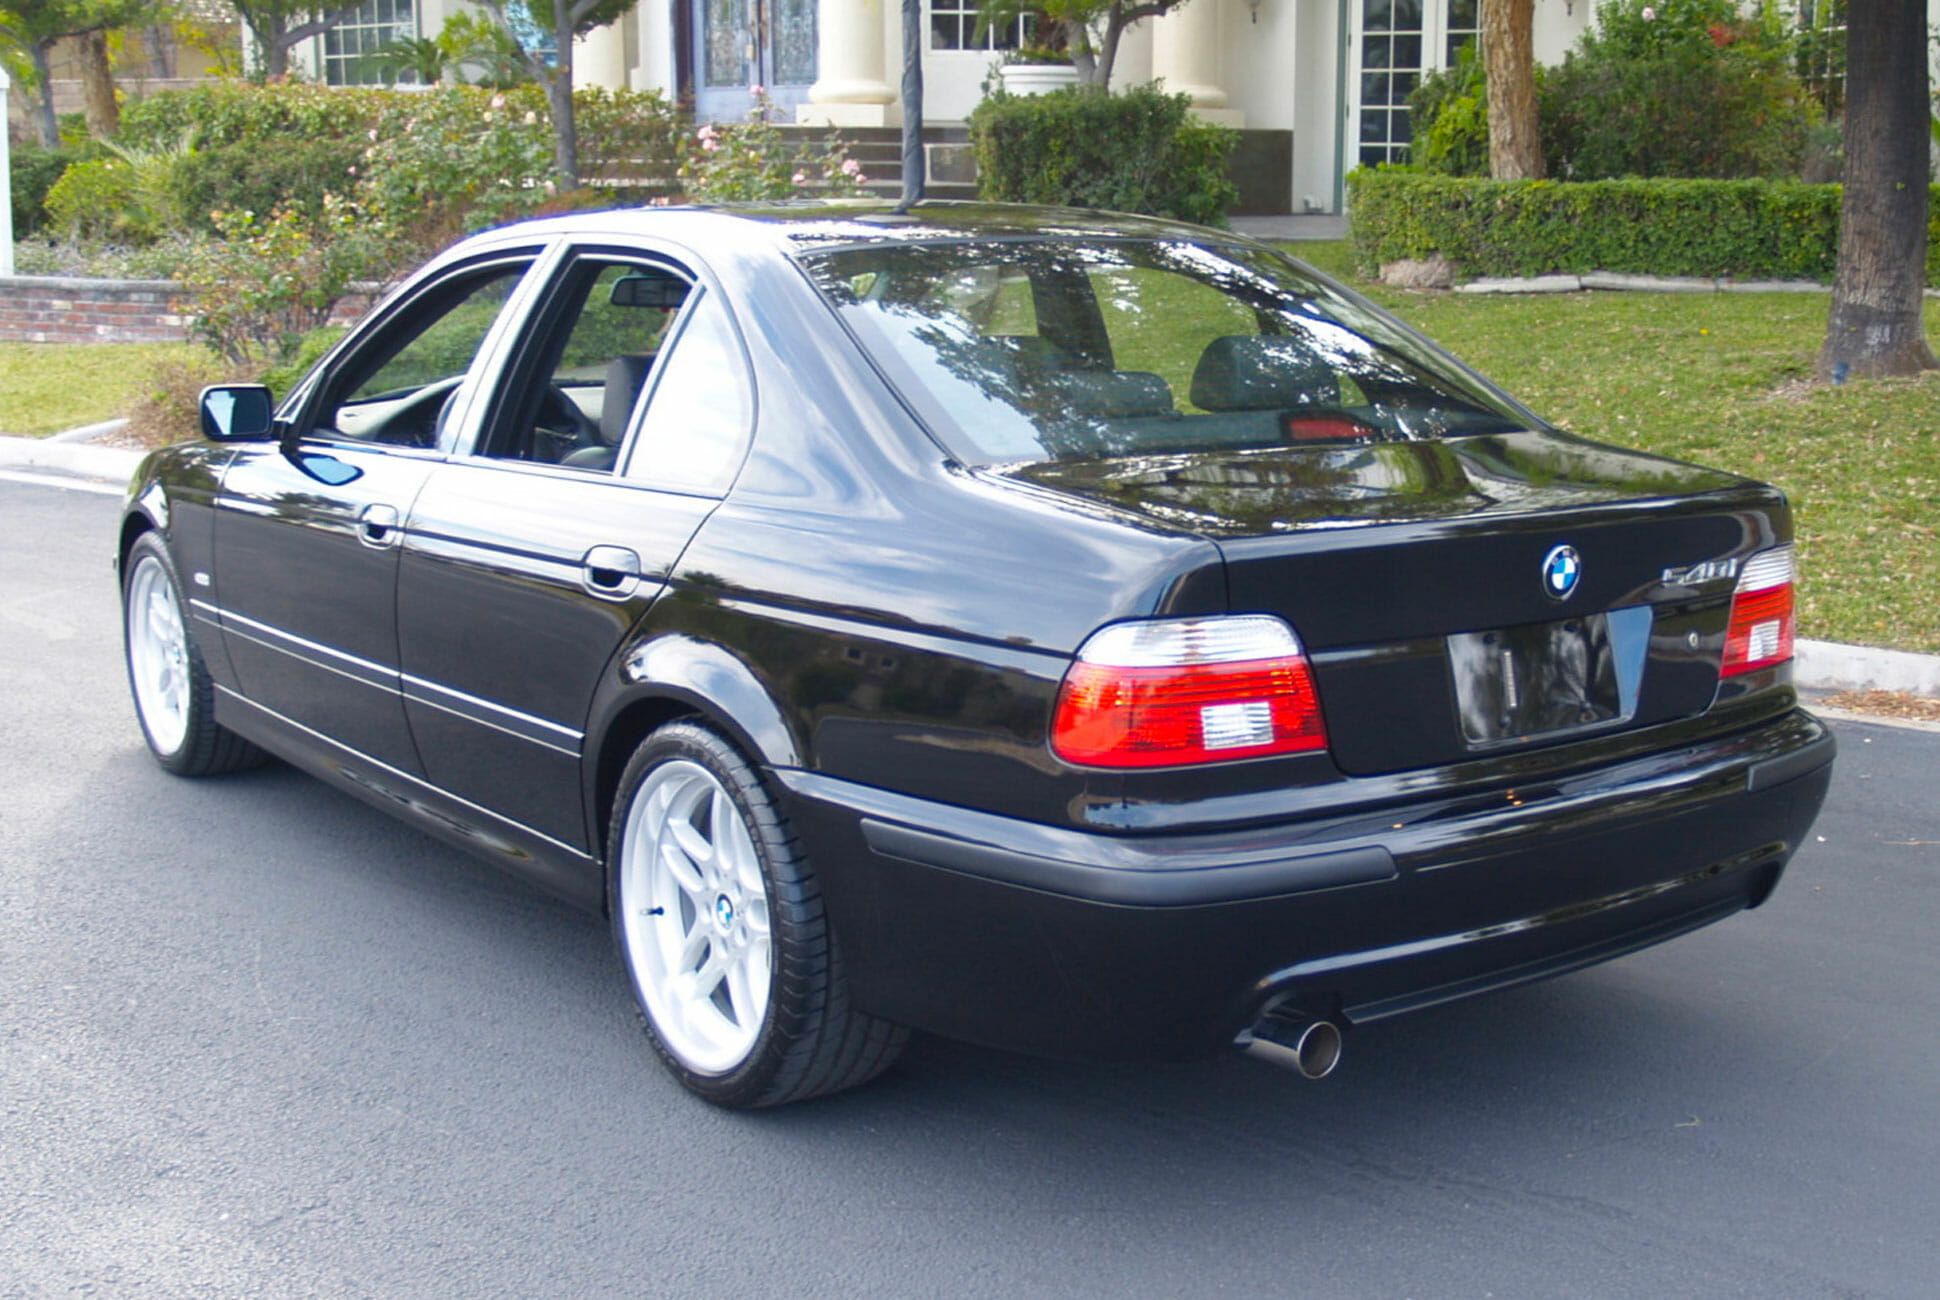 This BMW 540i Is a More Sensible, Affordable M5